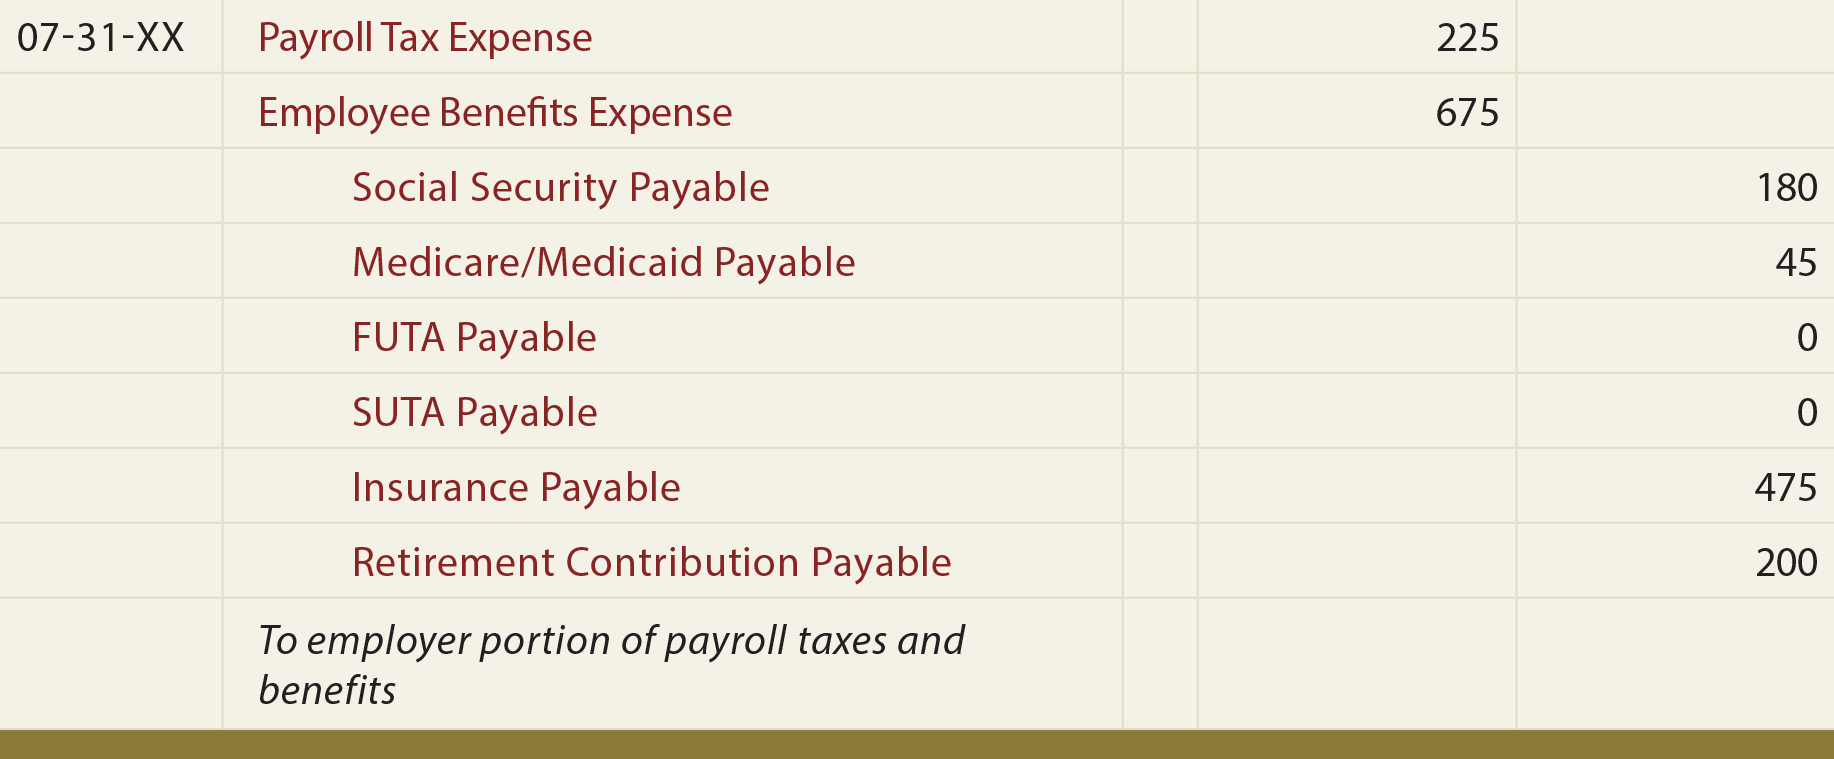 Payroll General Journal Entry - To record employer portion of payroll taxes and benefits